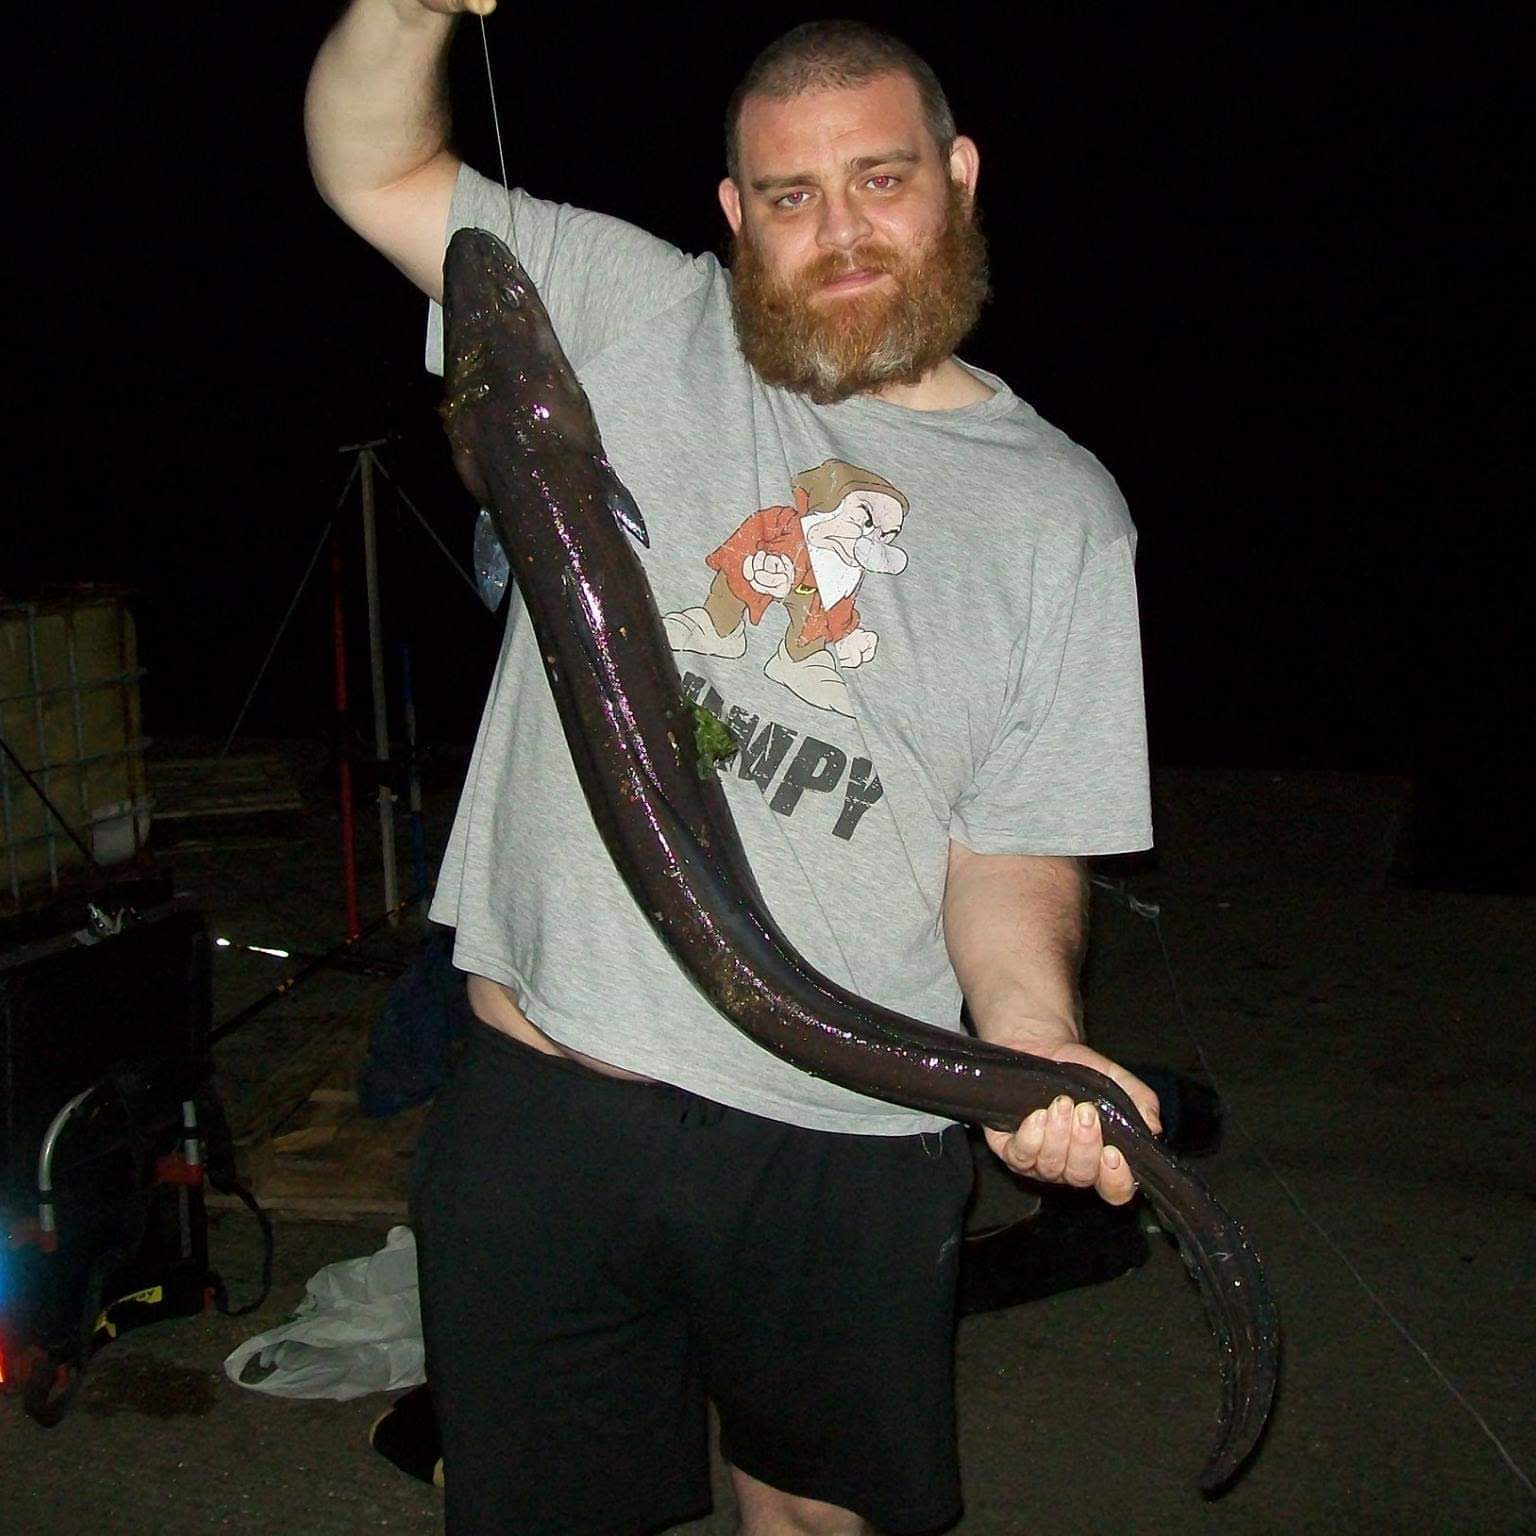 a conger eel caught when fishing at Doch Back in Holyhead